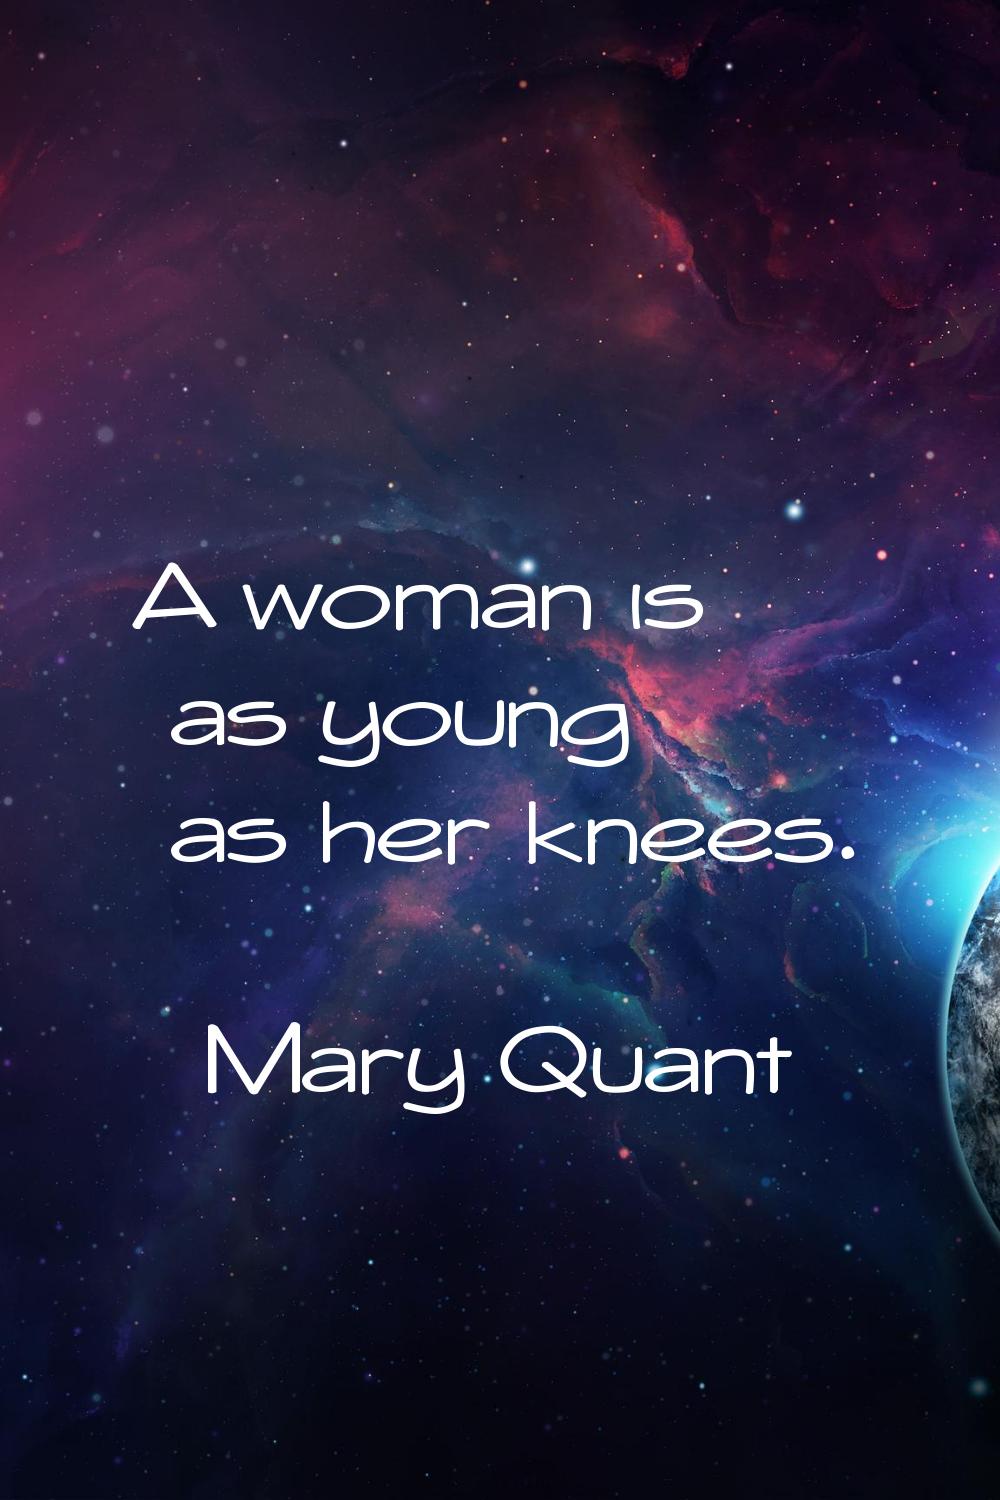 A woman is as young as her knees.